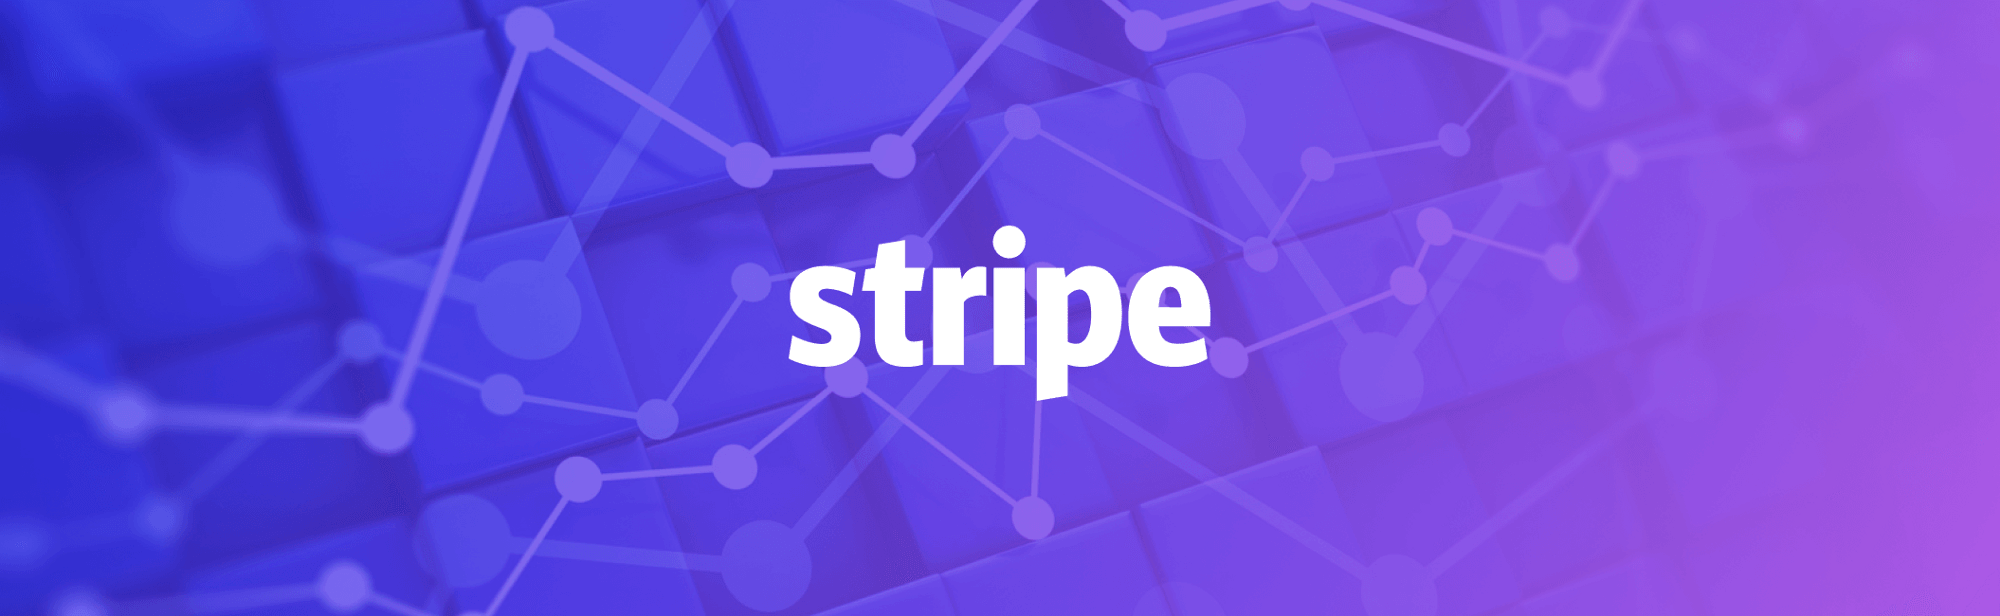 Stripe: An Electronic Payment Startup Is Now Worth $20 Billion